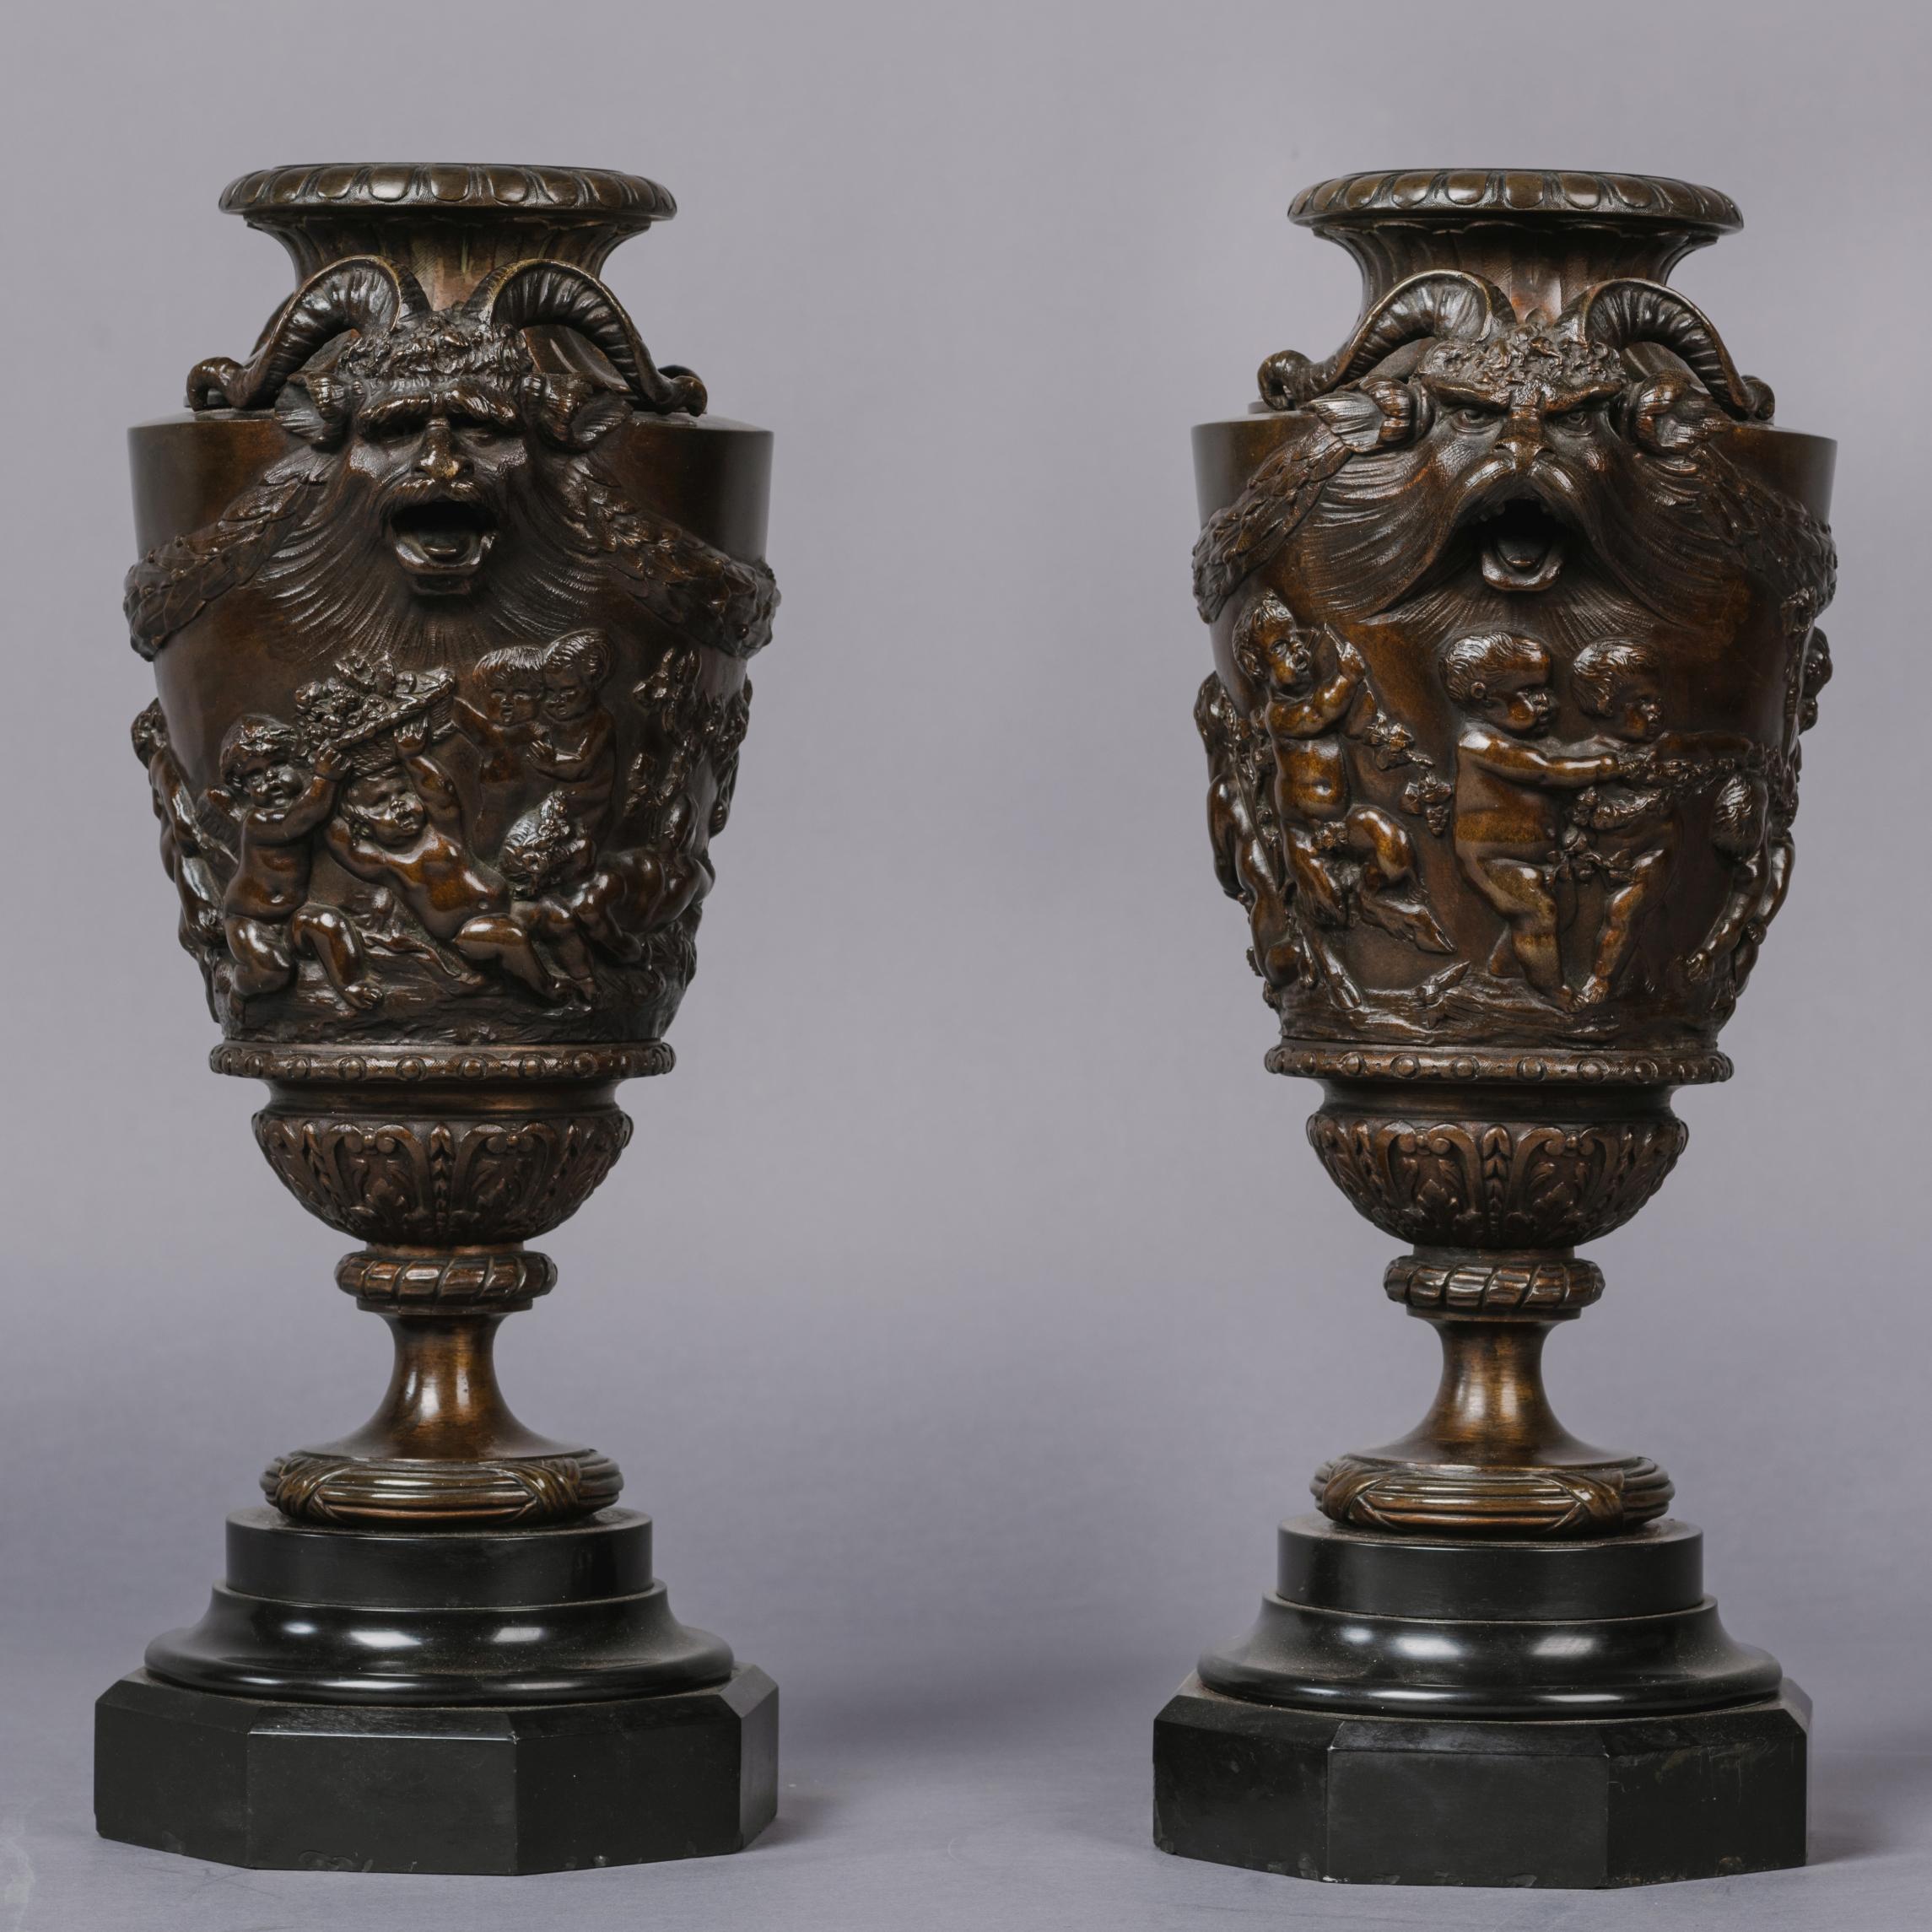 A fine pair of patinated bronze bacchanalian vases, after Clodion.

Cast after the design by Clodion, the vases are modelled with masks depicting chimerical ibex flanked by laurel swags, above a finely carved reliefs of young Bacchanals at play.